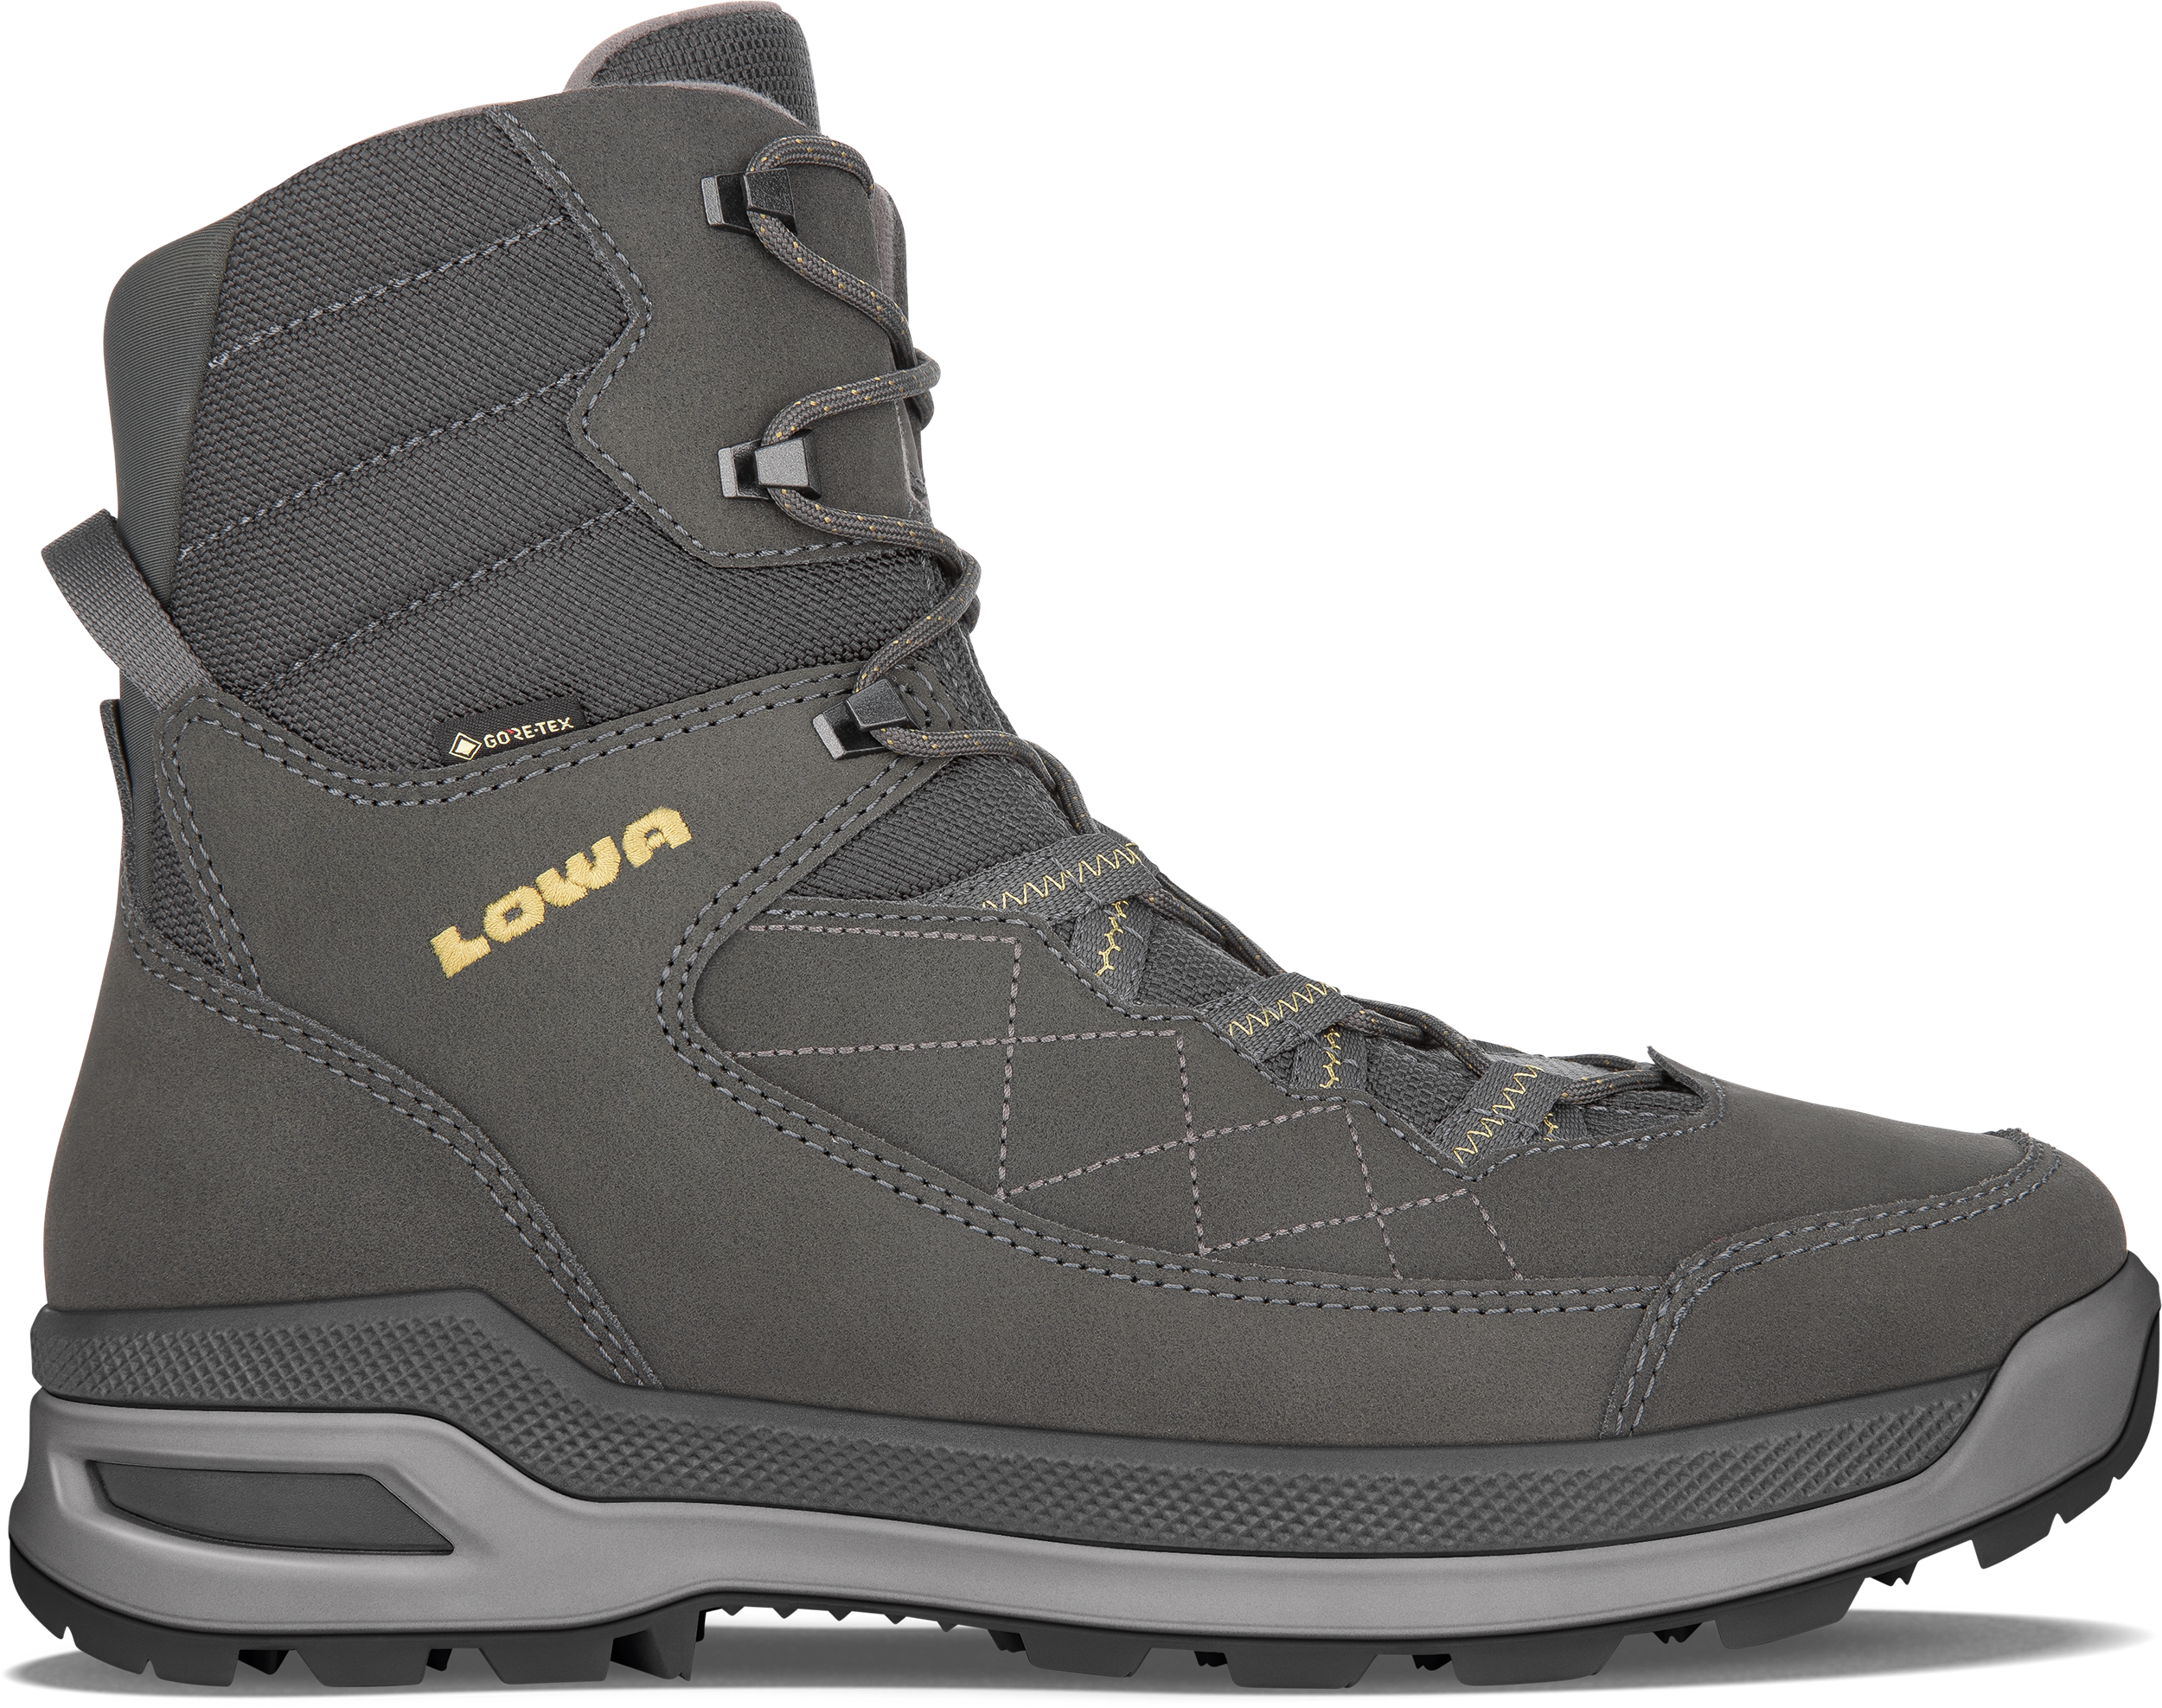 Leeuw Reductor fee OTTAWA GTX: COLD WEATHER BOOTS for men | LOWA INT